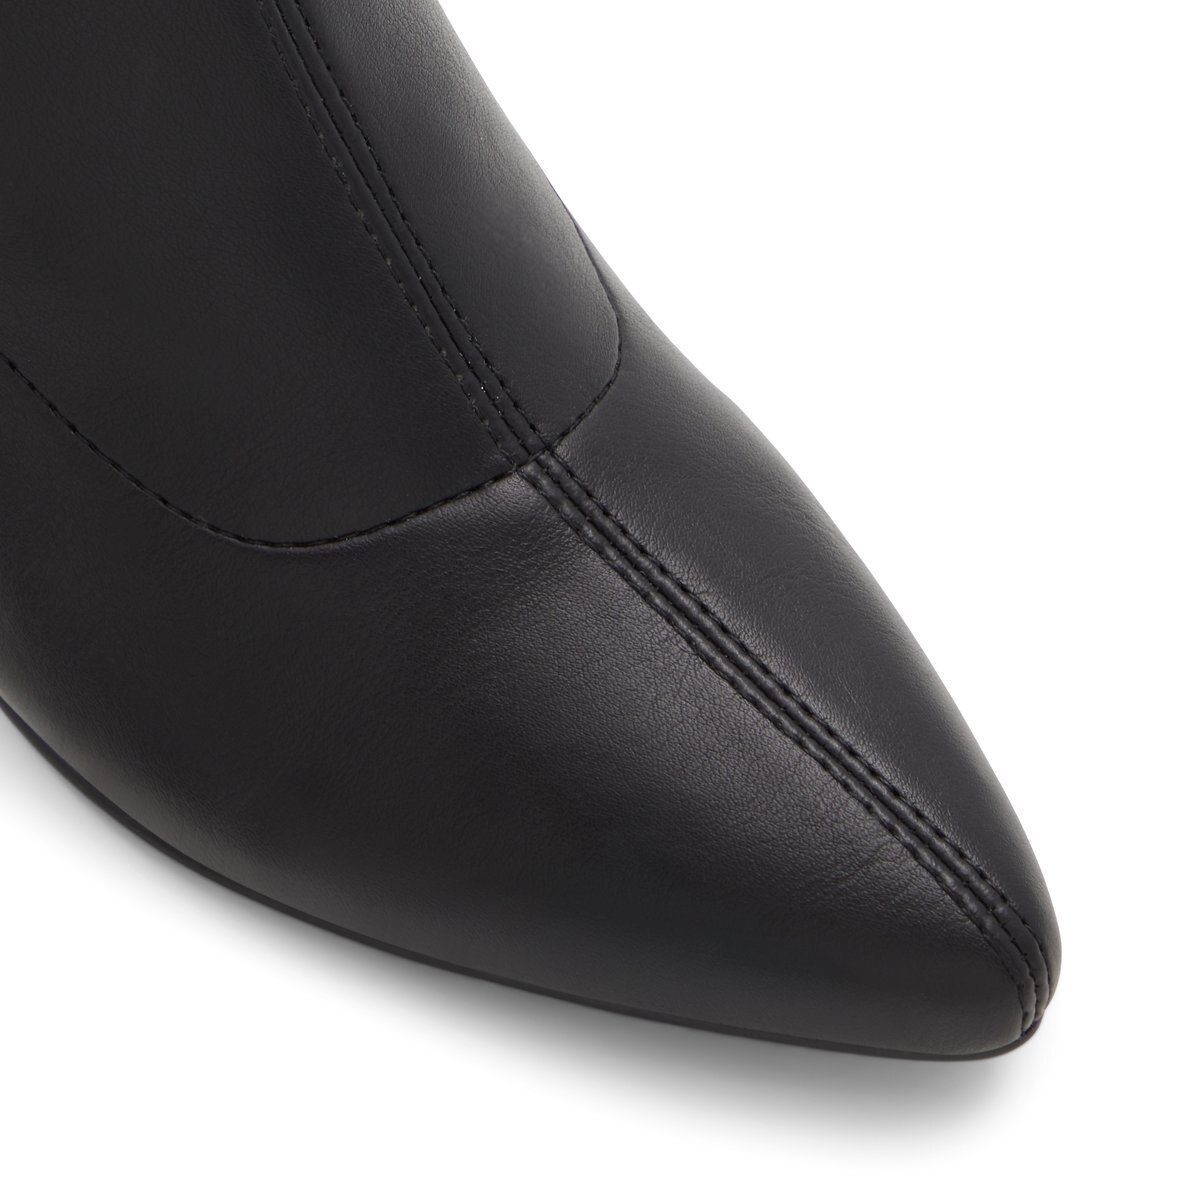 Ameeka Black Women's Ankle Boots | Call It Spring Canada